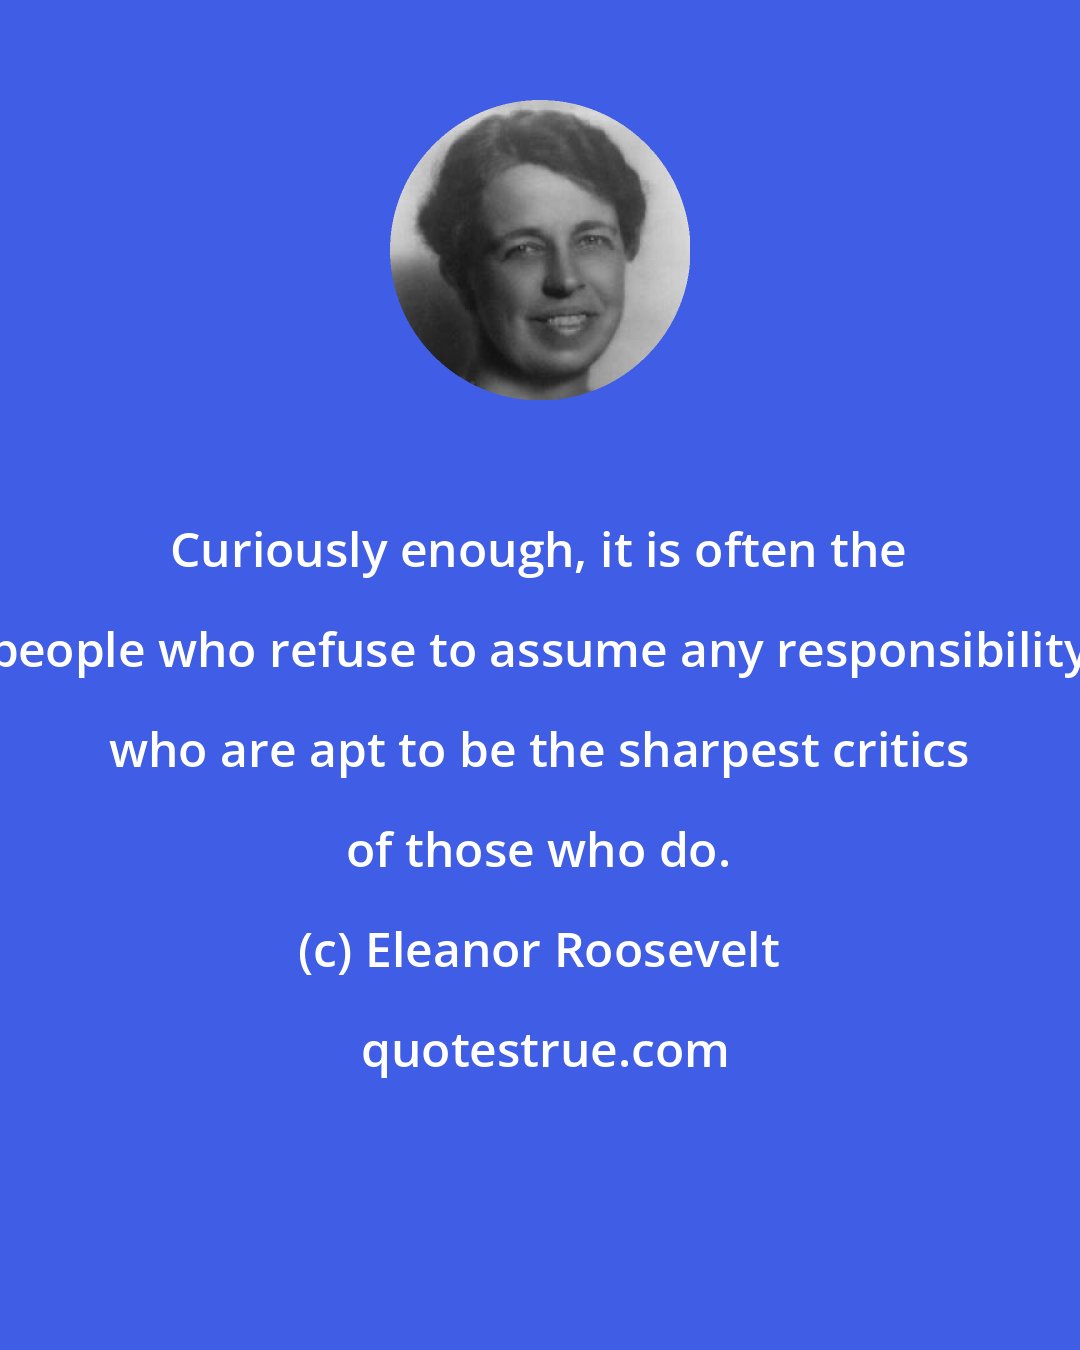 Eleanor Roosevelt: Curiously enough, it is often the people who refuse to assume any responsibility who are apt to be the sharpest critics of those who do.